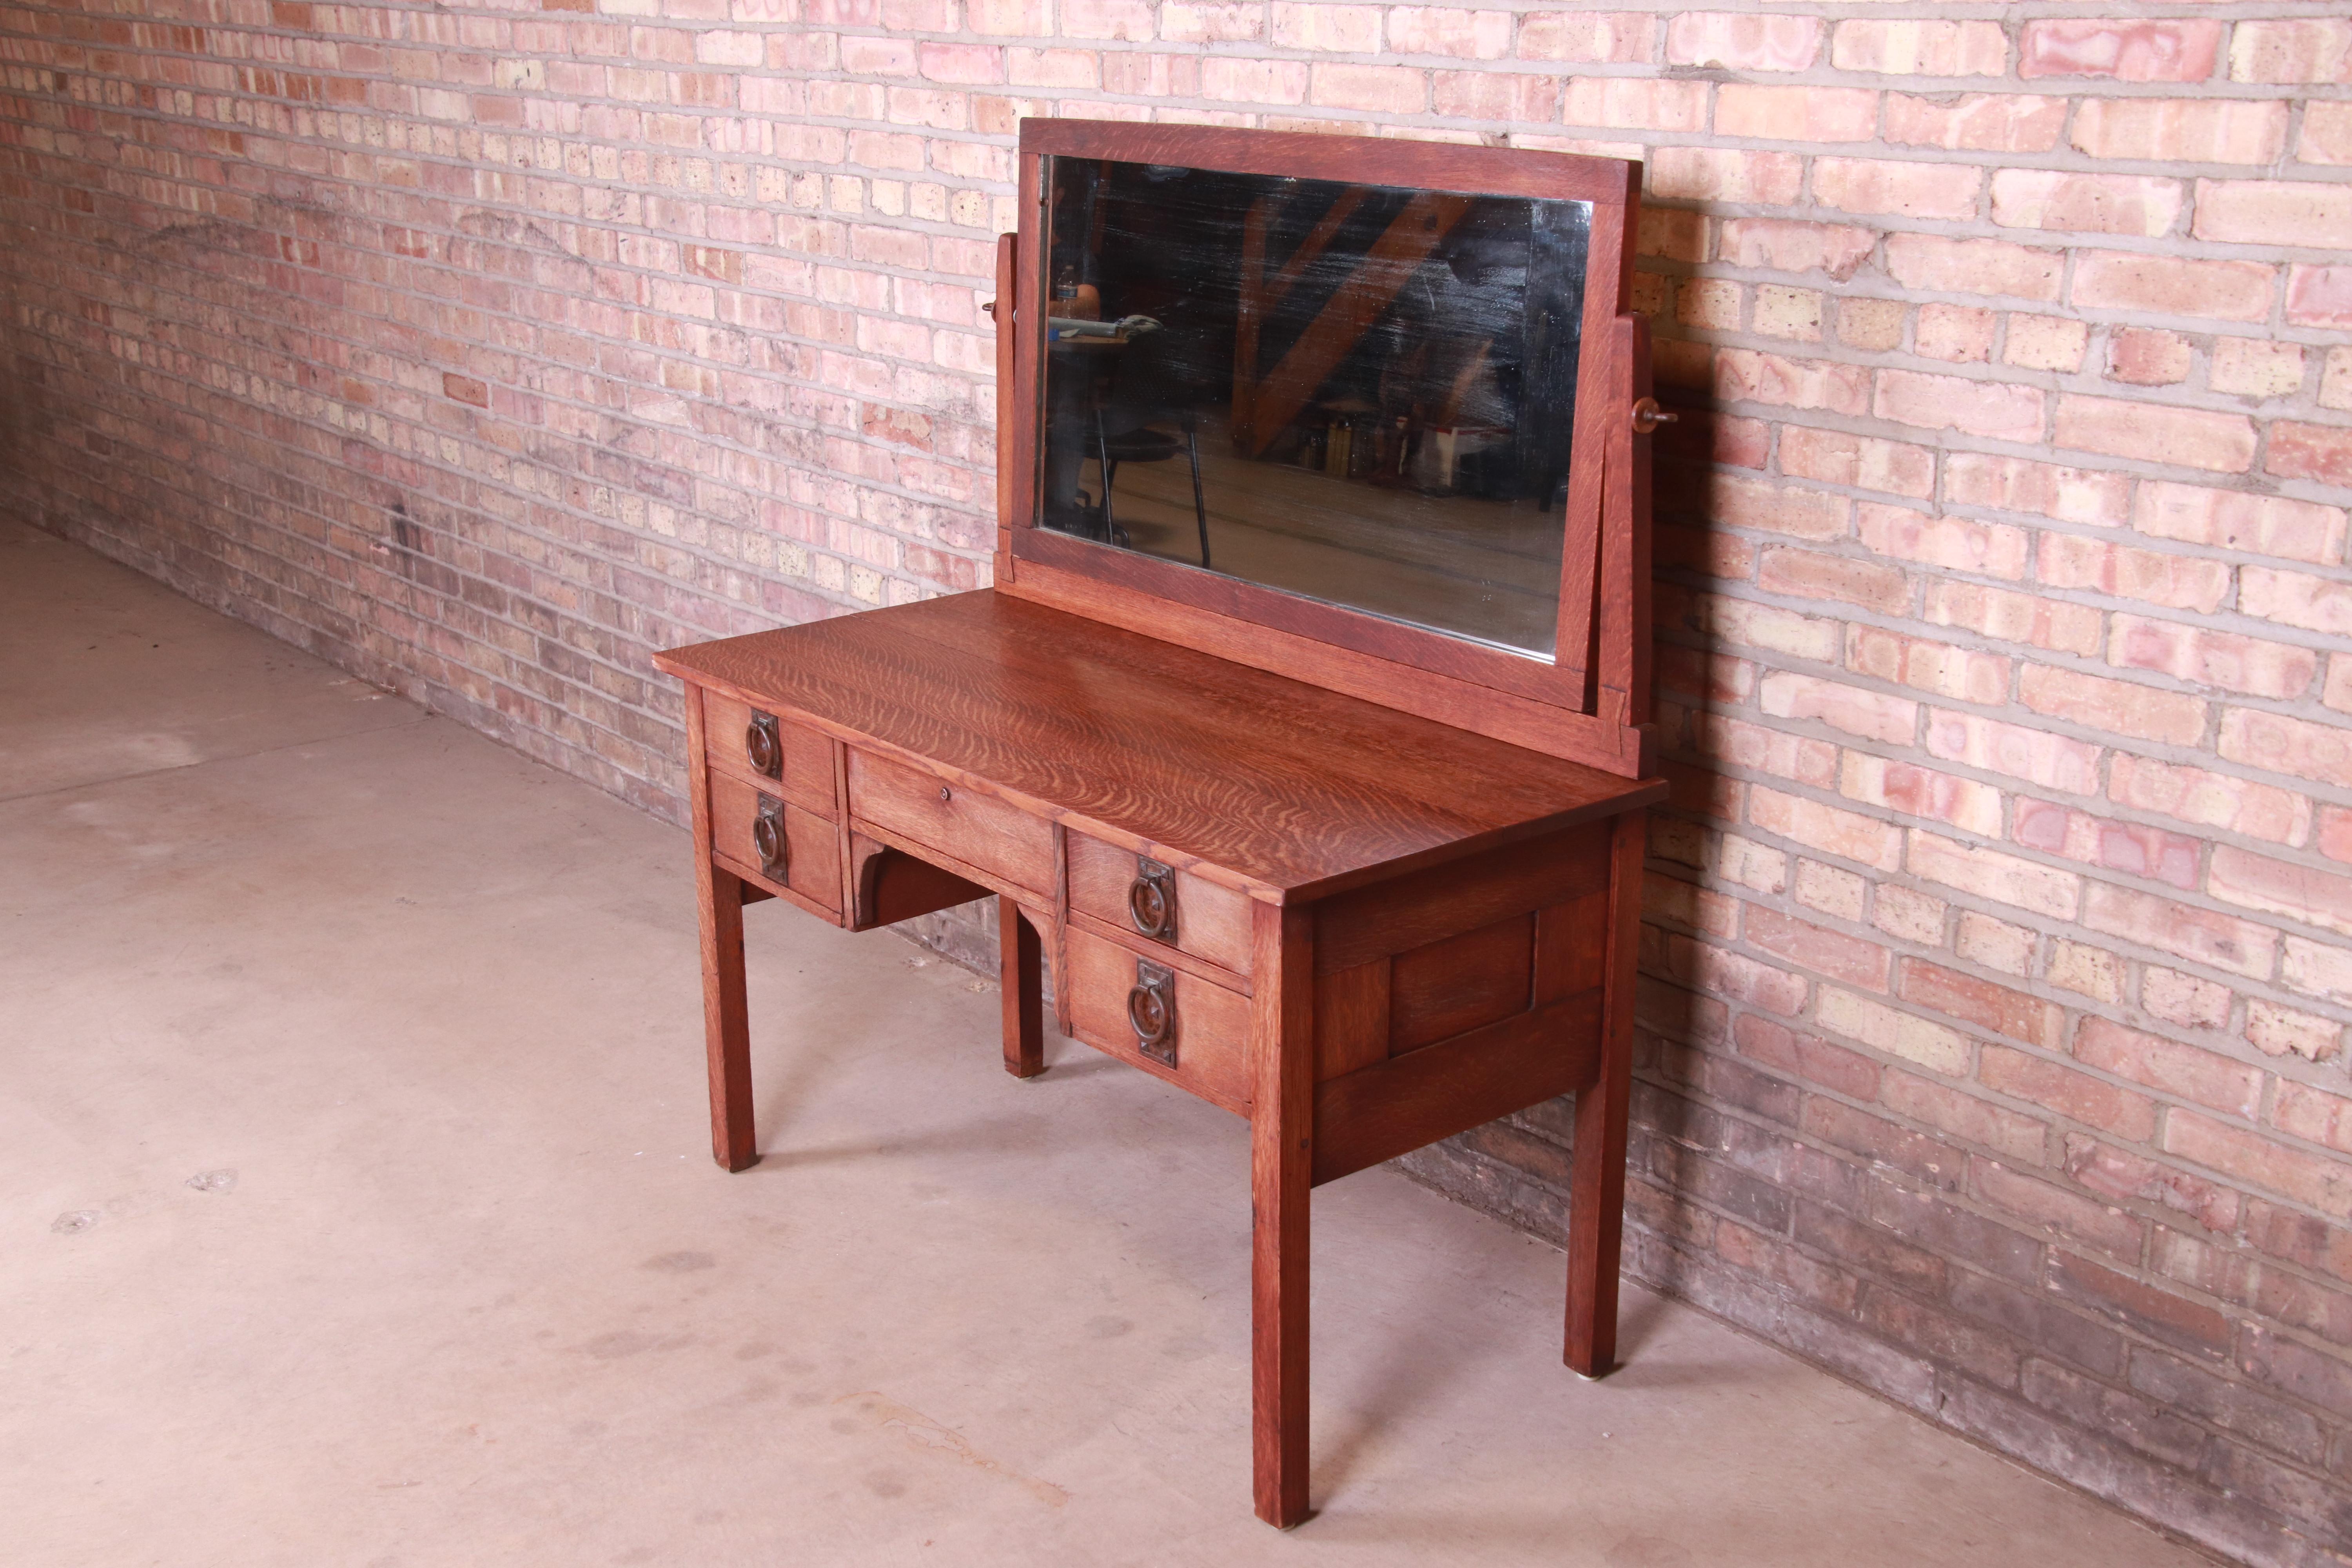 A rare and exceptional antique Mission oak Arts & Crafts vanity or dressing table with mirror

By Gustav Stickley

USA, Circa 1909

Solid quarter sawn oak, with original mirror, and original hammered copper hardware.

Measures: 48